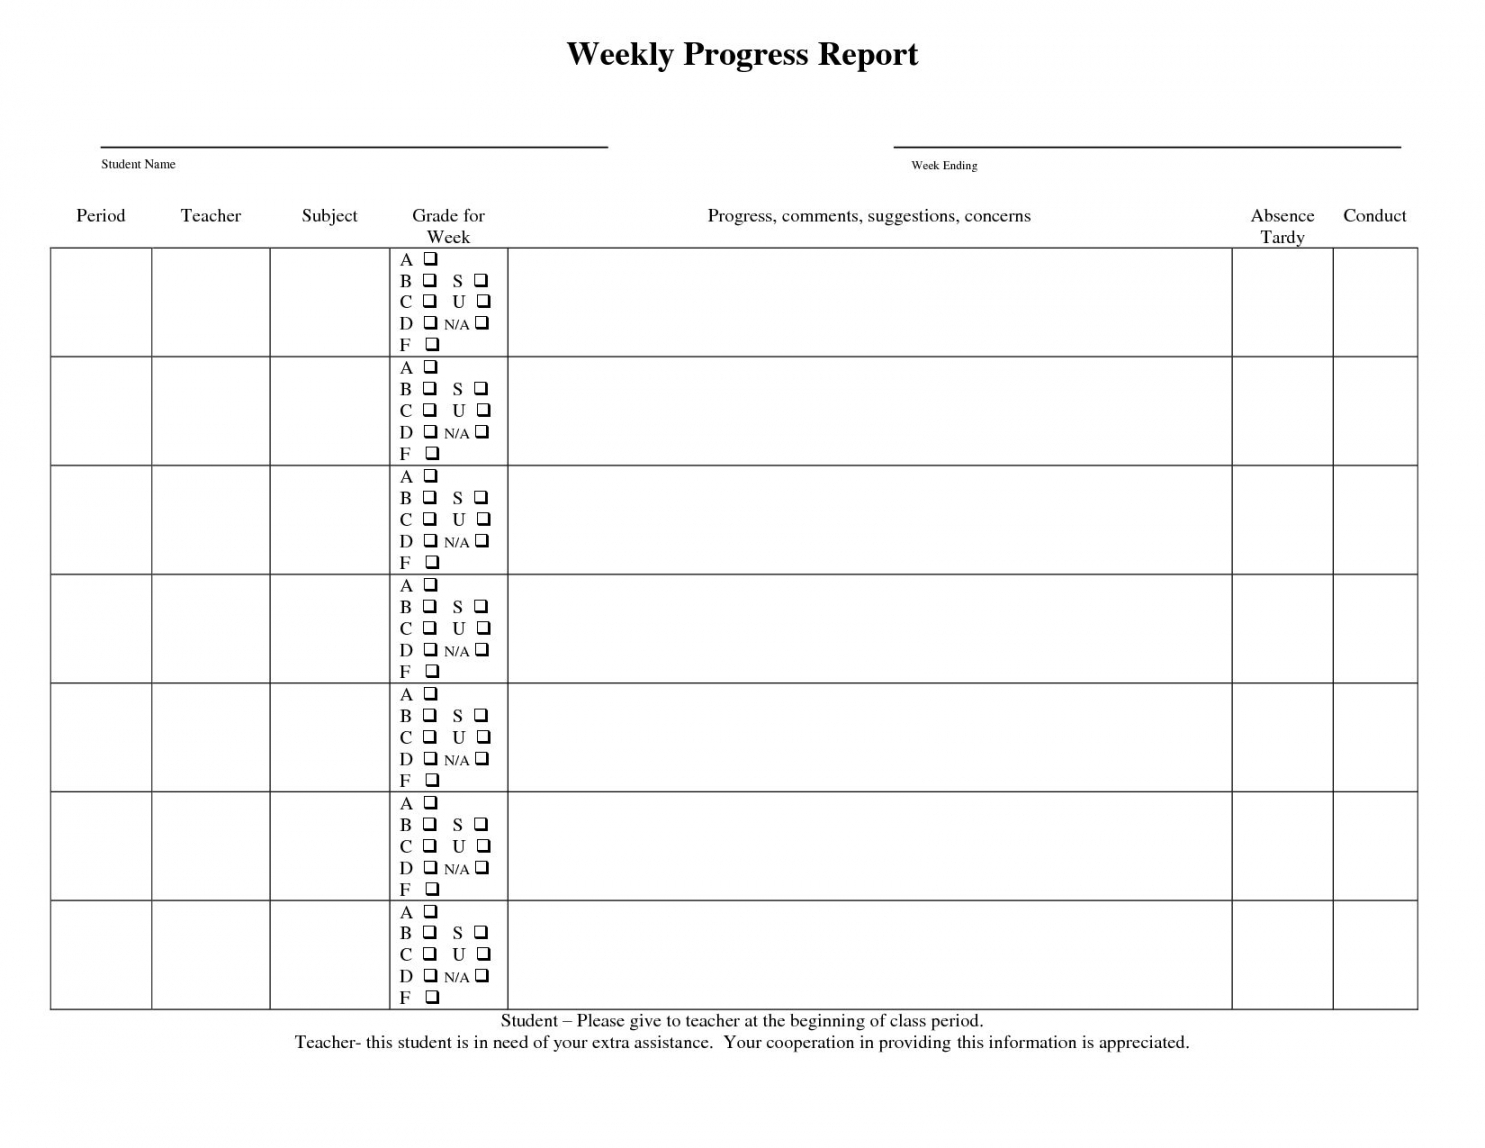 Daily Progress Report Format Excel Construction Glendale For Construction Daily Progress Report Template